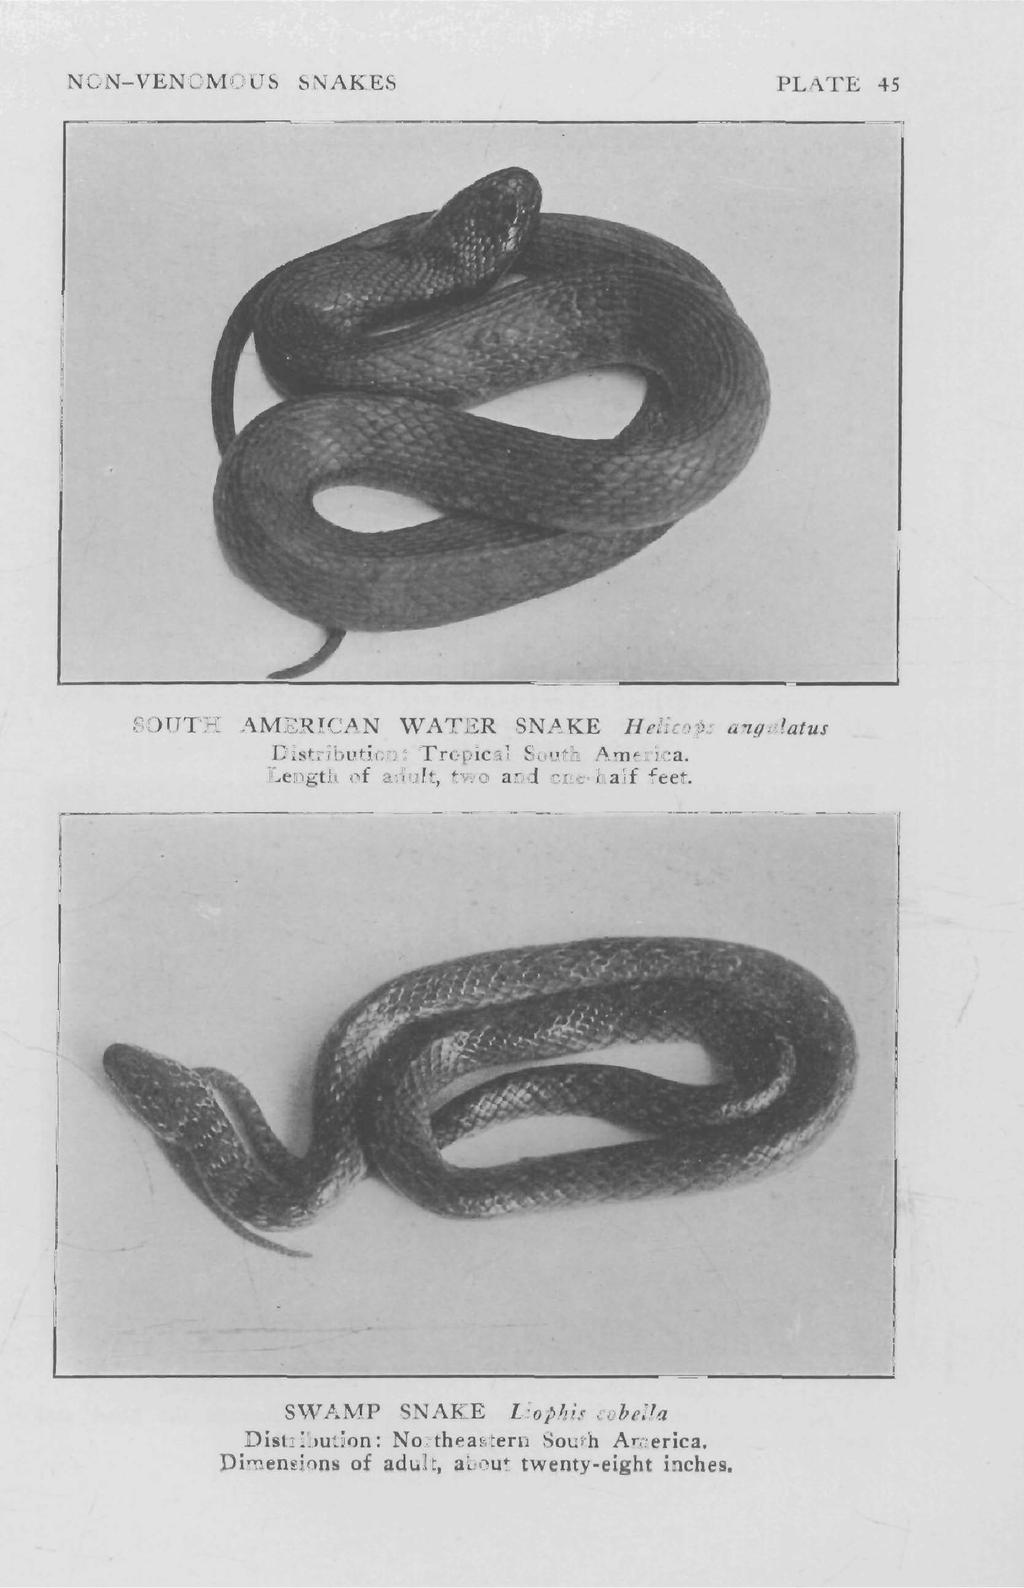 NON-VENOMOUS SNAKES PLATE 45 SOUTH AMERICAN WATER SNAKE Helicops angulatus Distribution: Tropical South America.